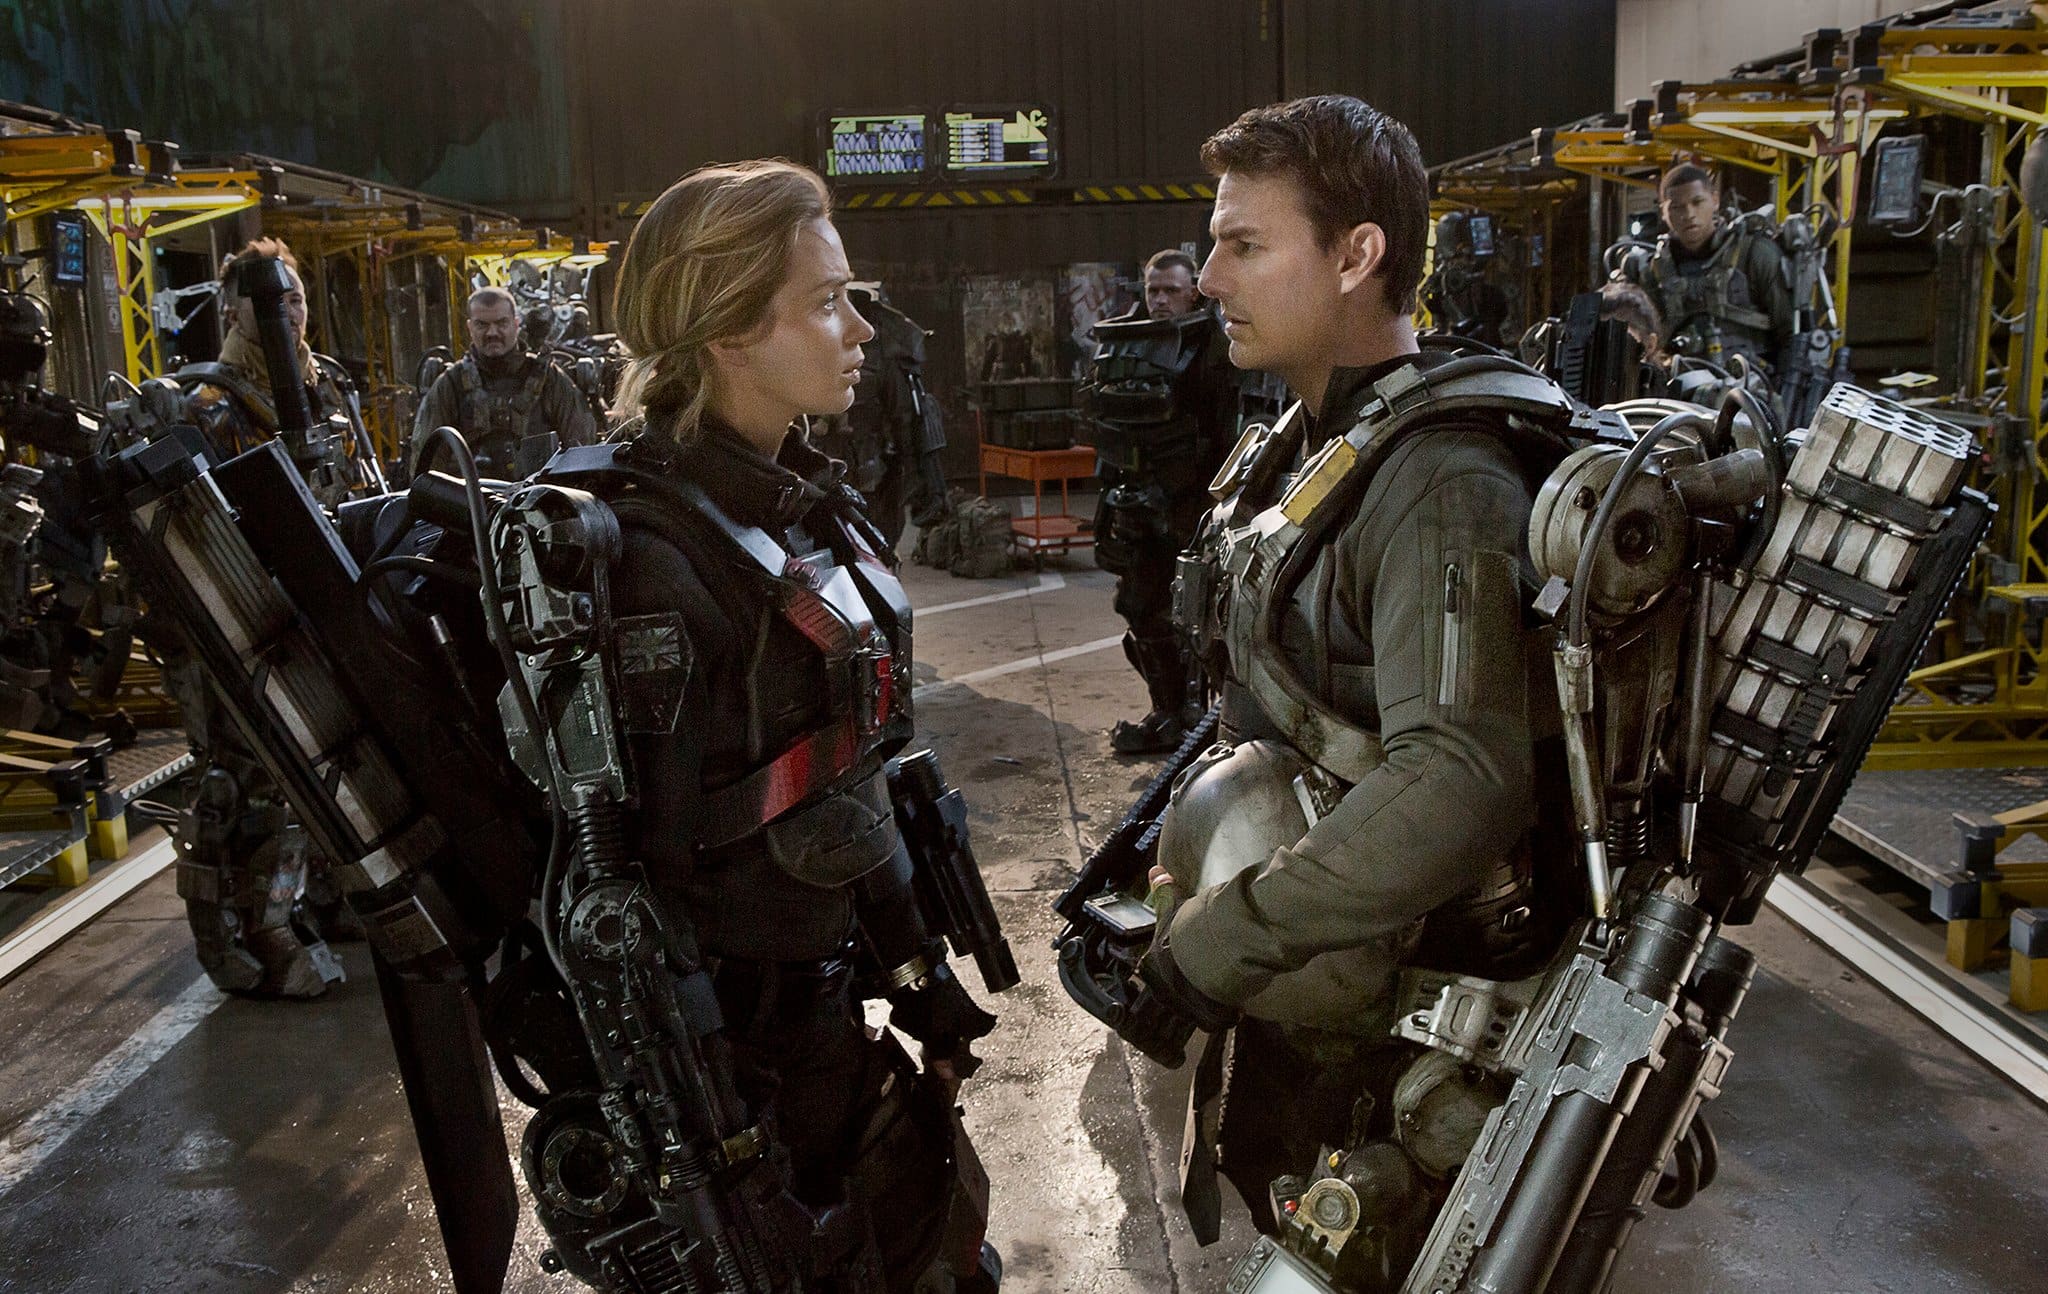 Tom Cruise was 52 when he played the role of Major William Cage opposite Emily Blunt in the sci-fi action movie Edge of Tomorrow